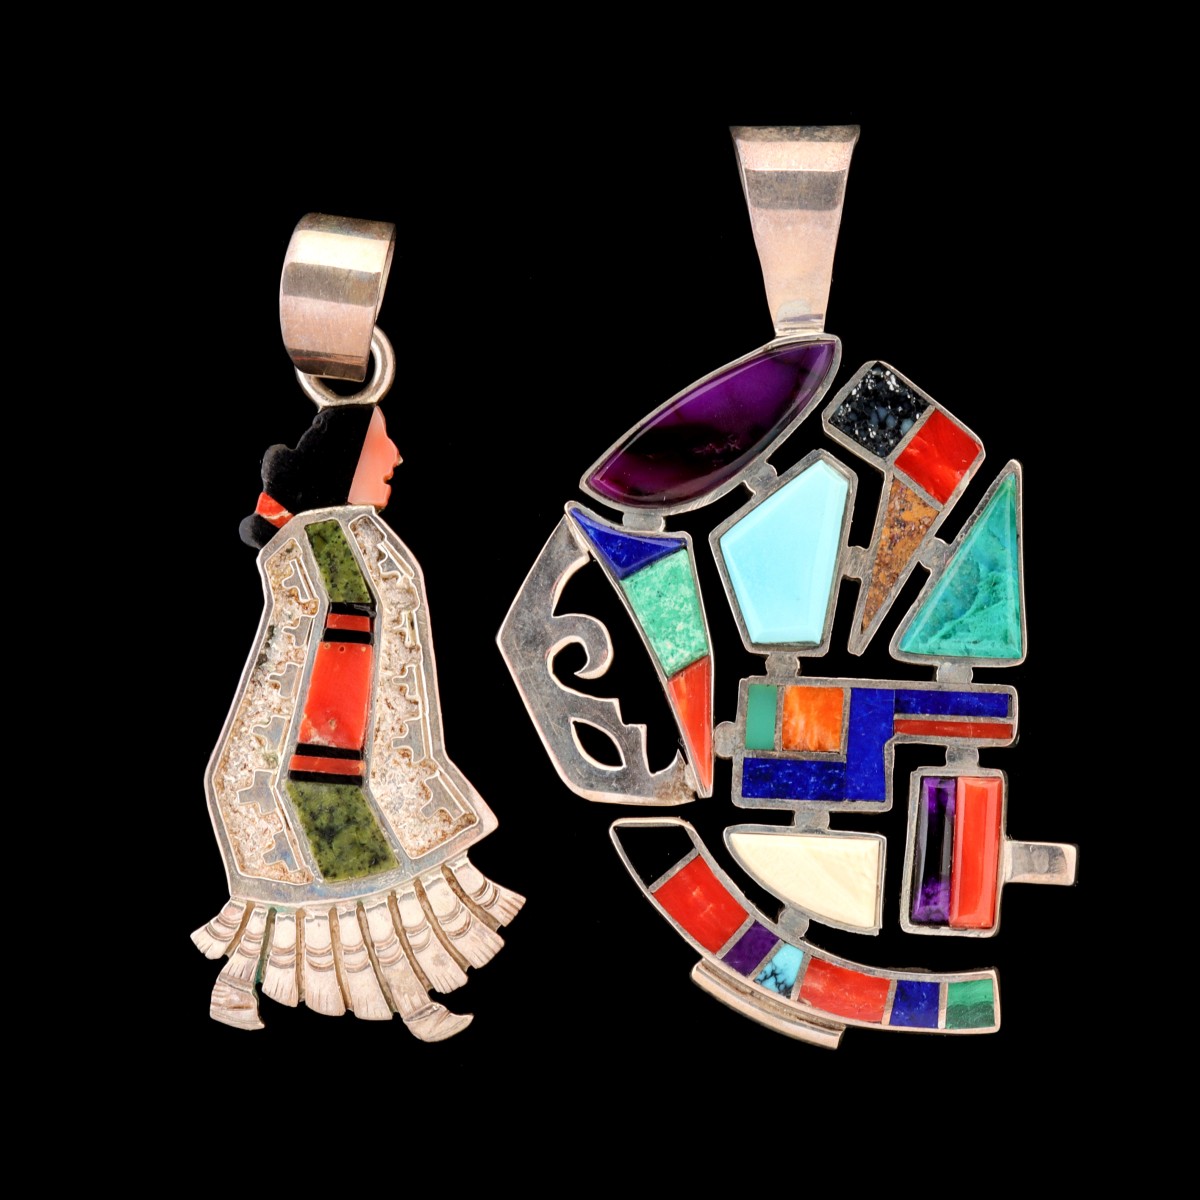 NATIVE AMERICAN INLAID JEWELRY OF ABSTRACTED FORMS